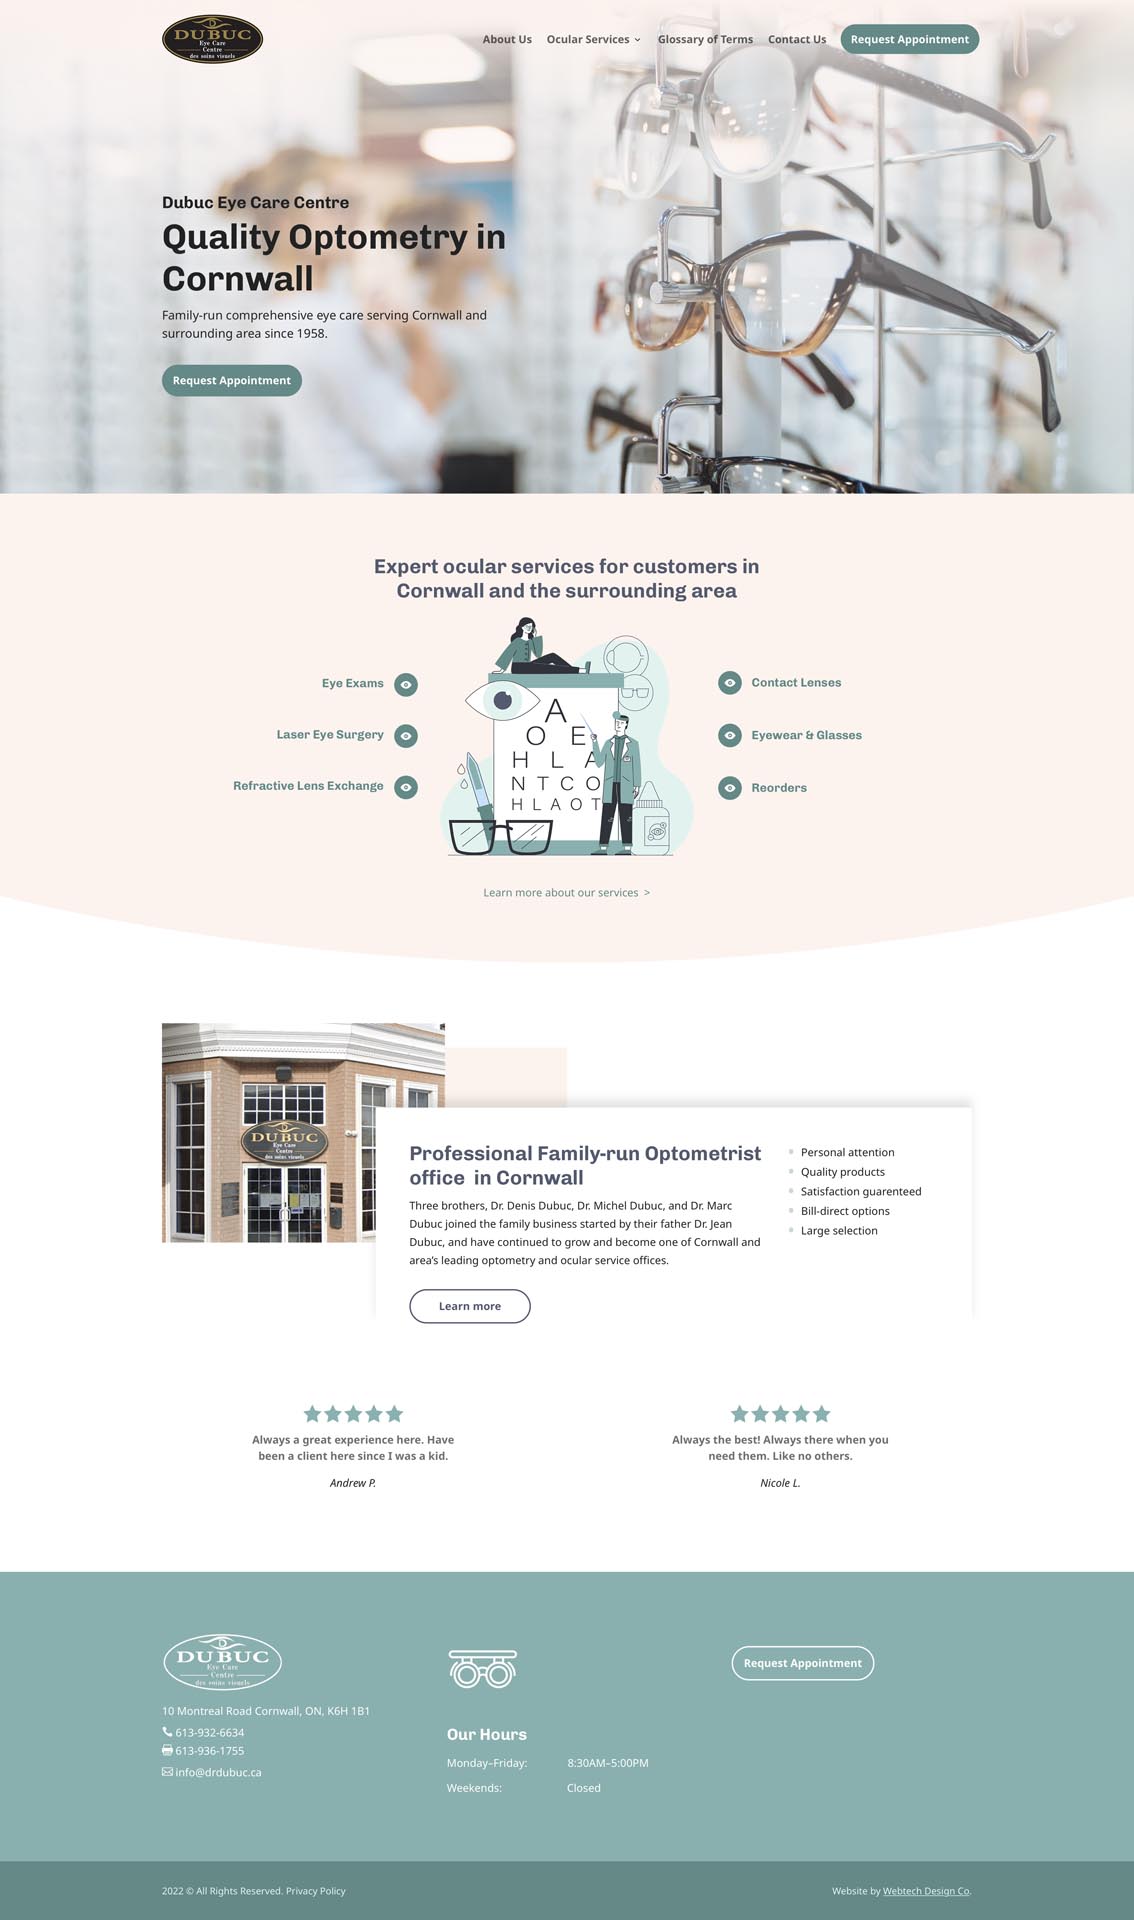 Web design services for small business in Cornwall for Dubuc Eye Care